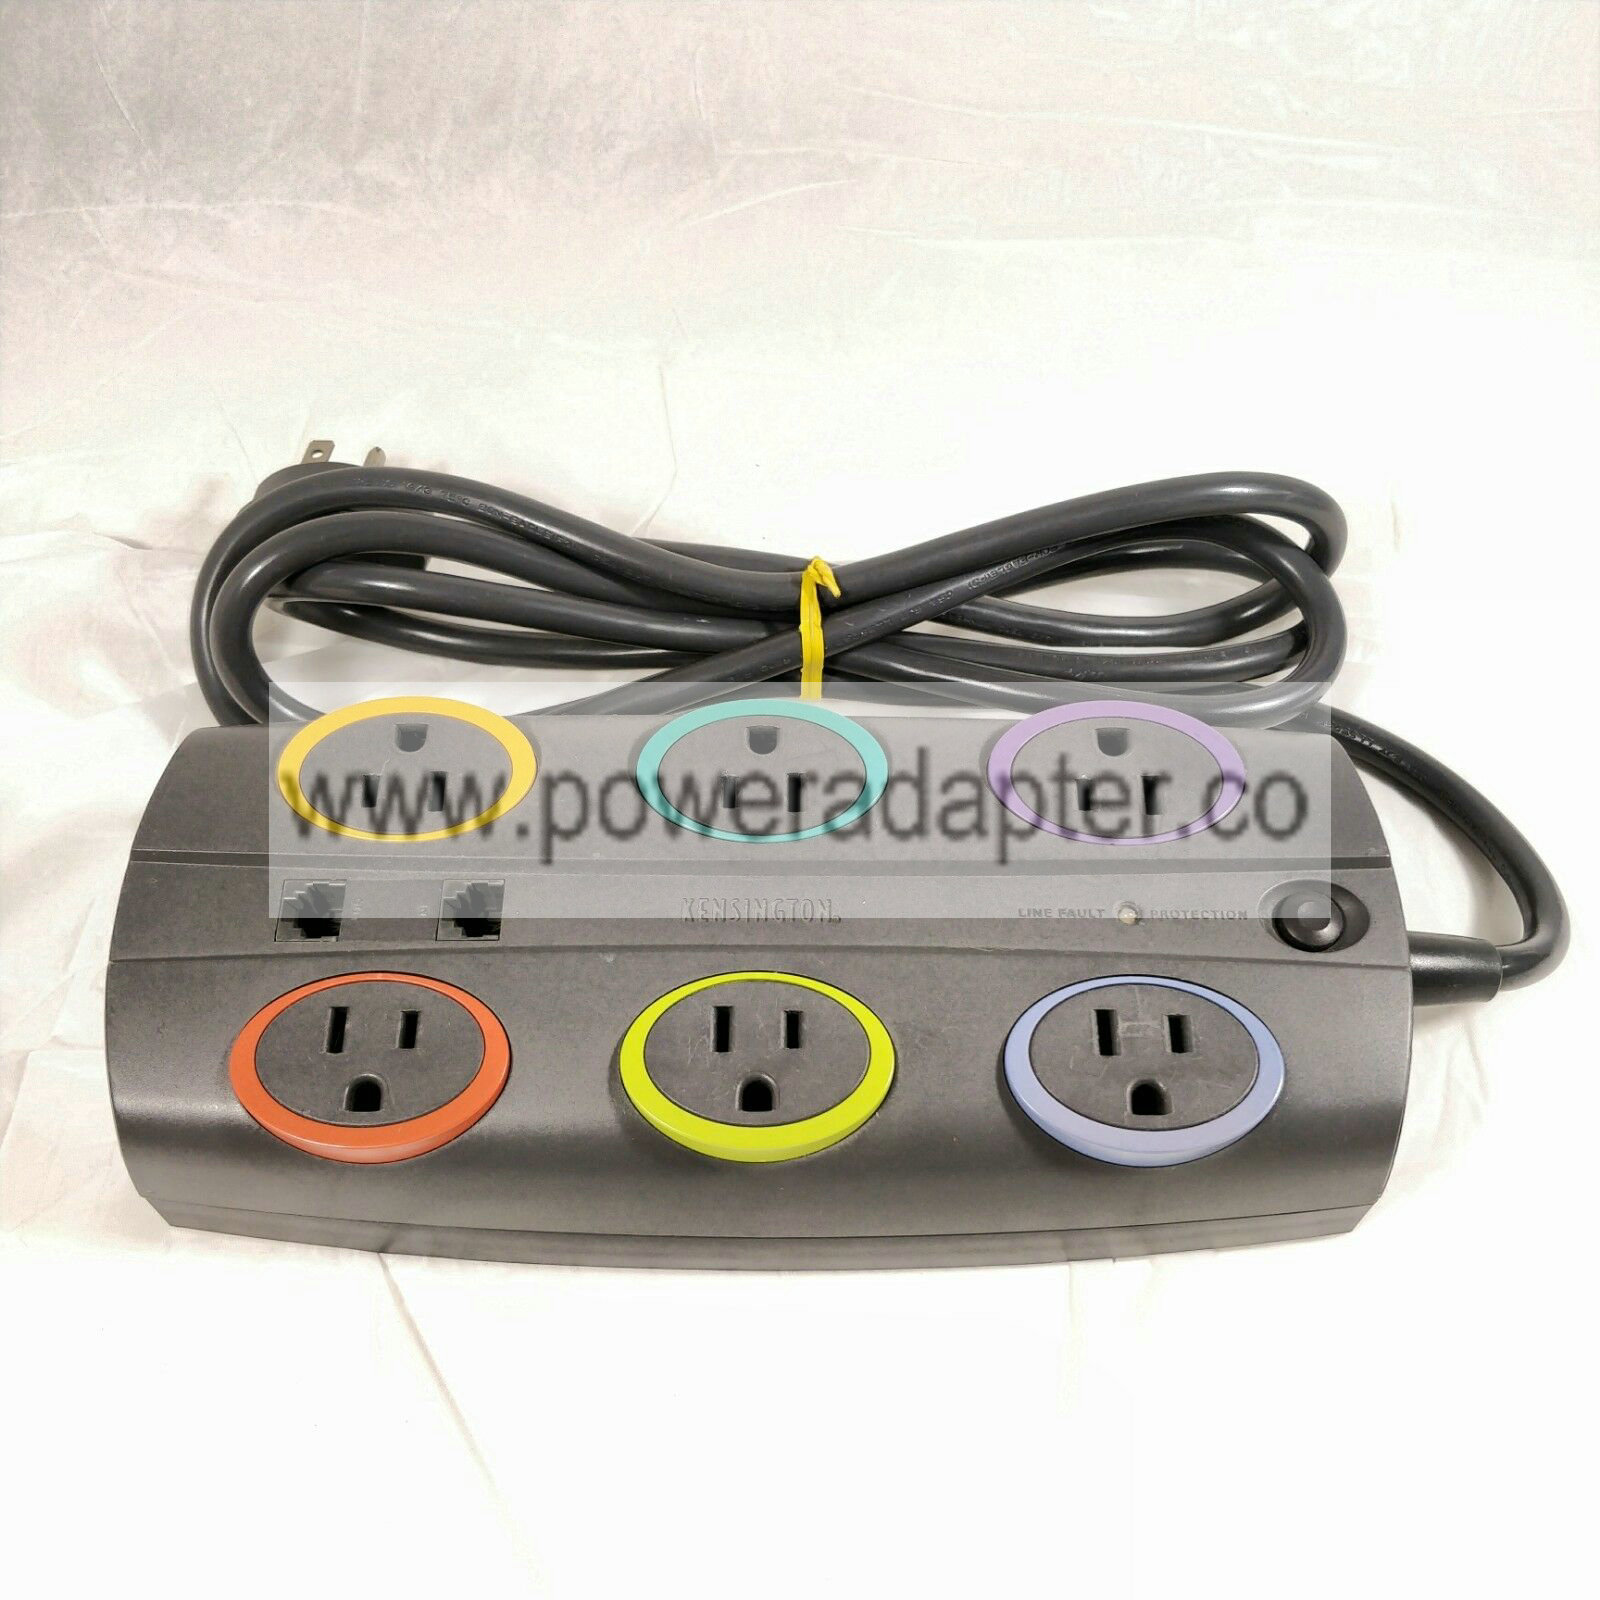 Kensington Line Fault Protection Six Outlet Model Number K62151 Tested GUC Great Price on a good Surge protector. & - Click Image to Close